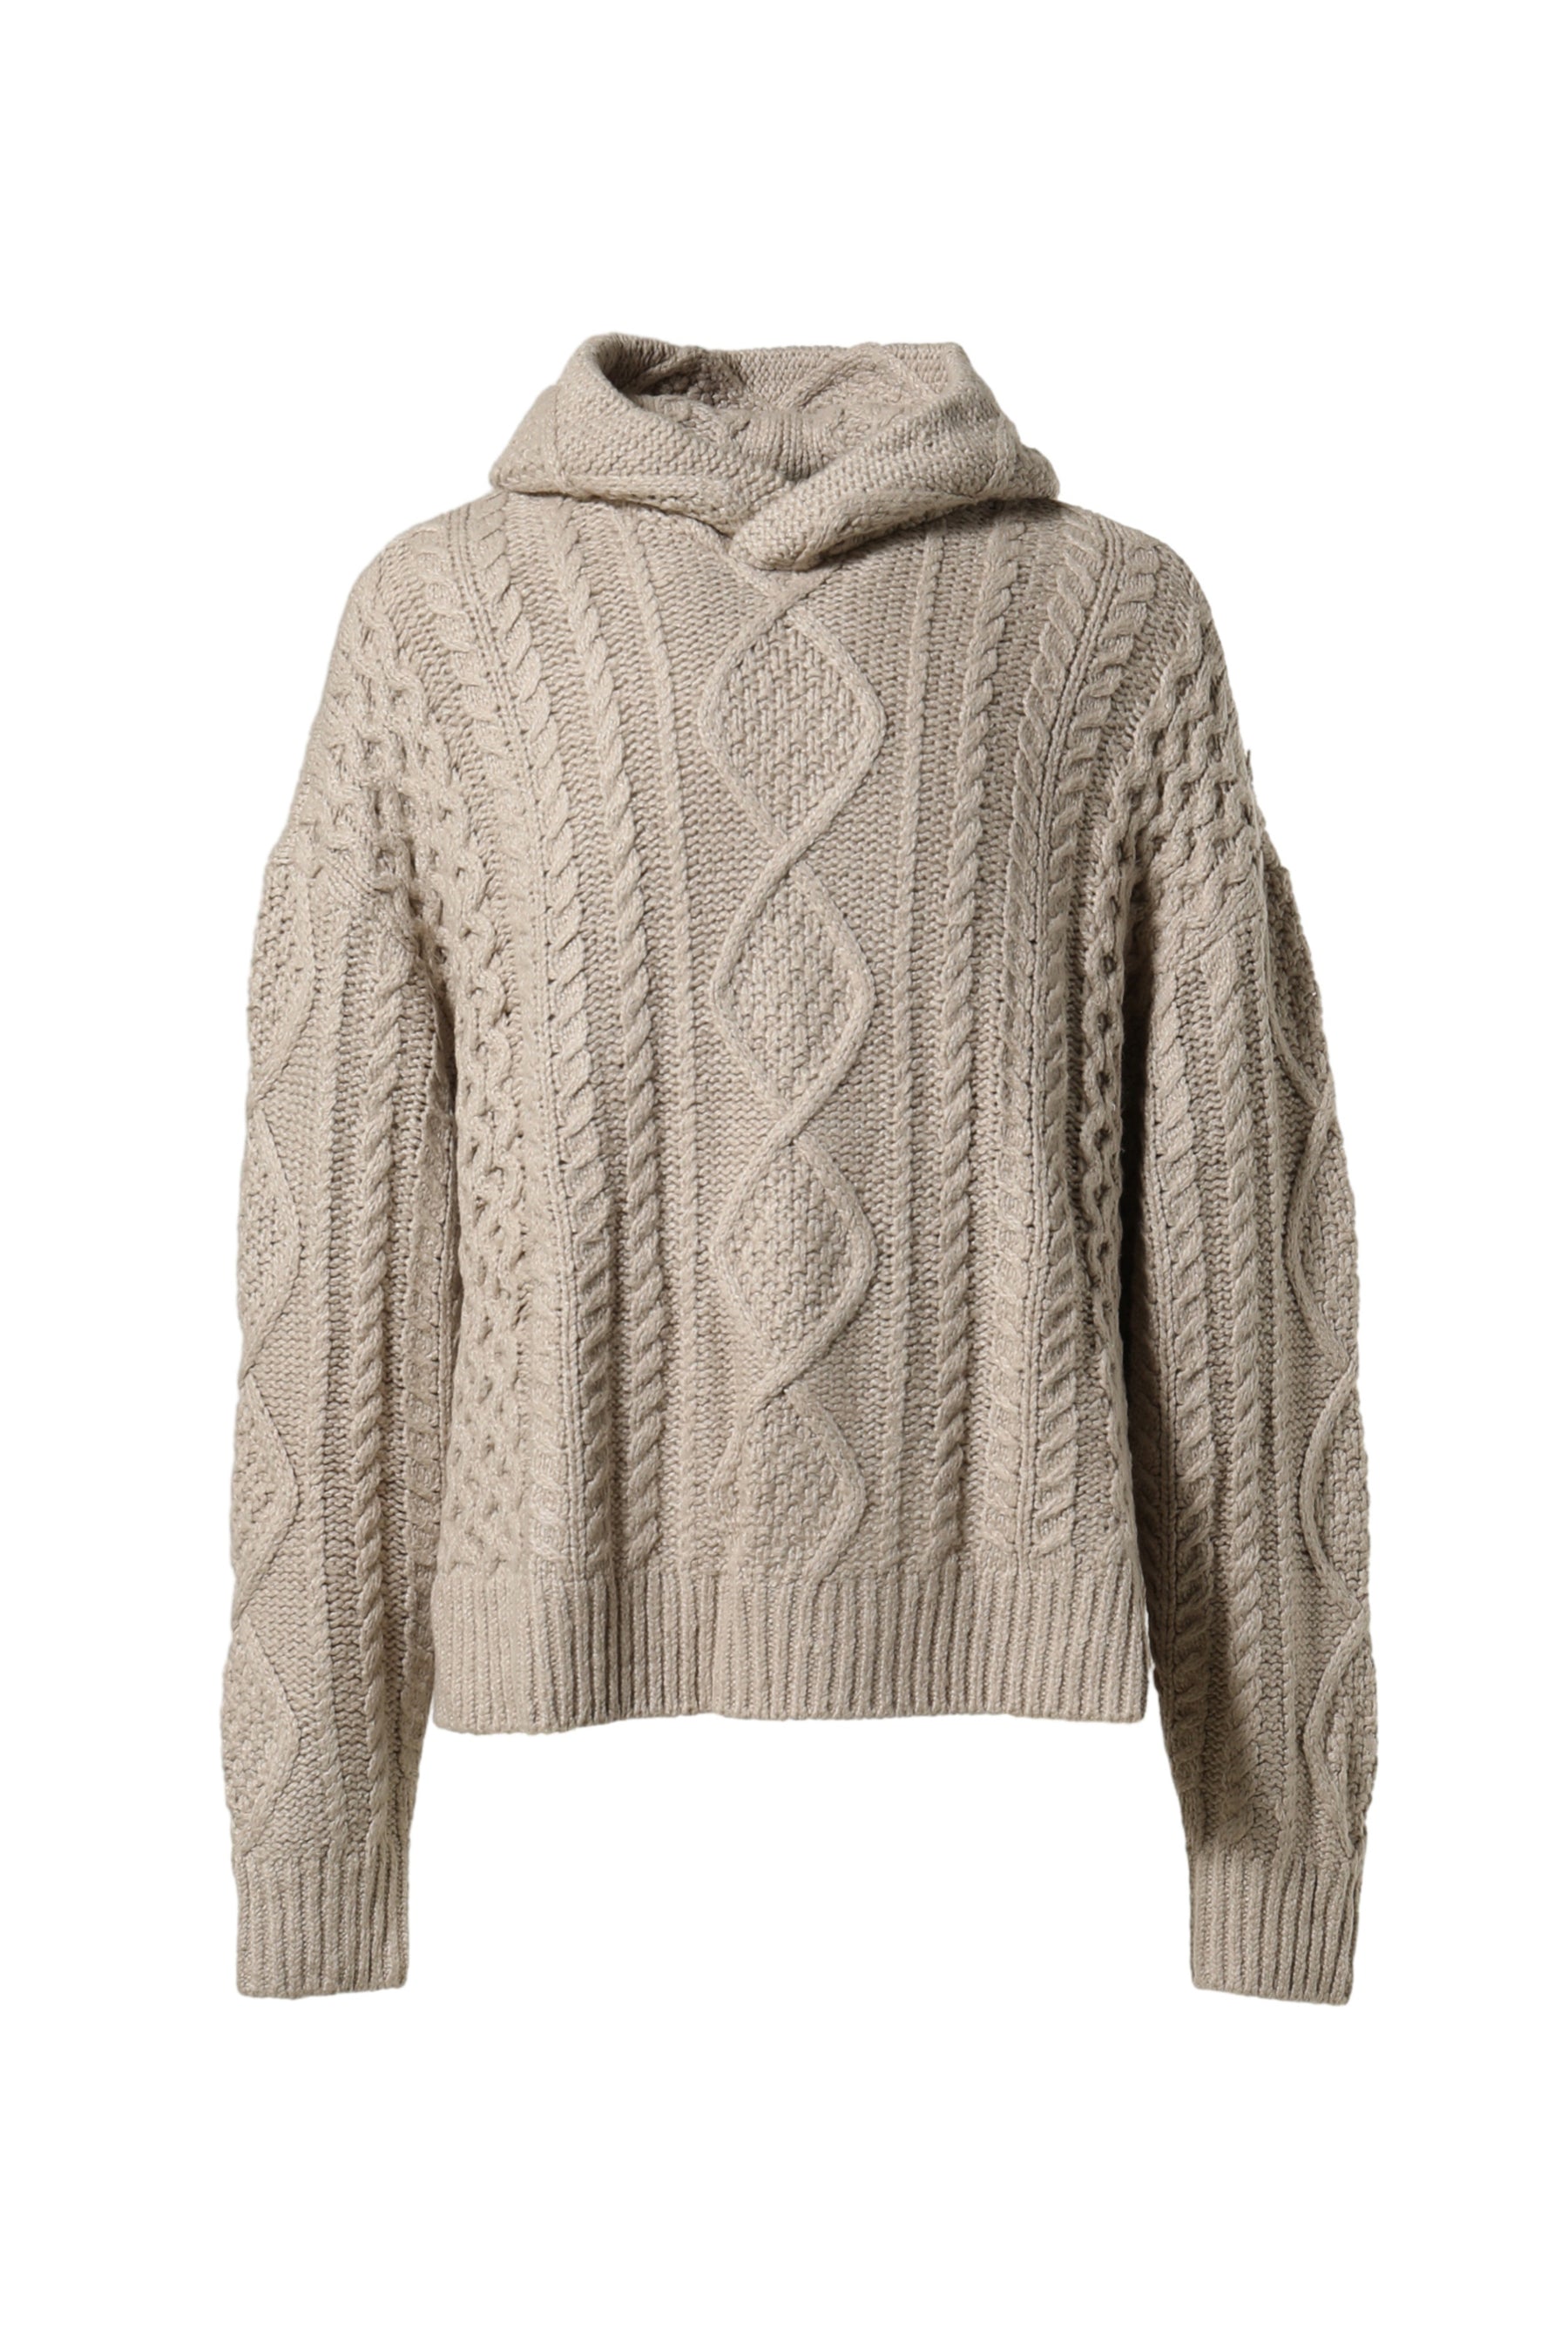 23awで即完した商品ですCable Knit Hoodie　ESSENTIALS